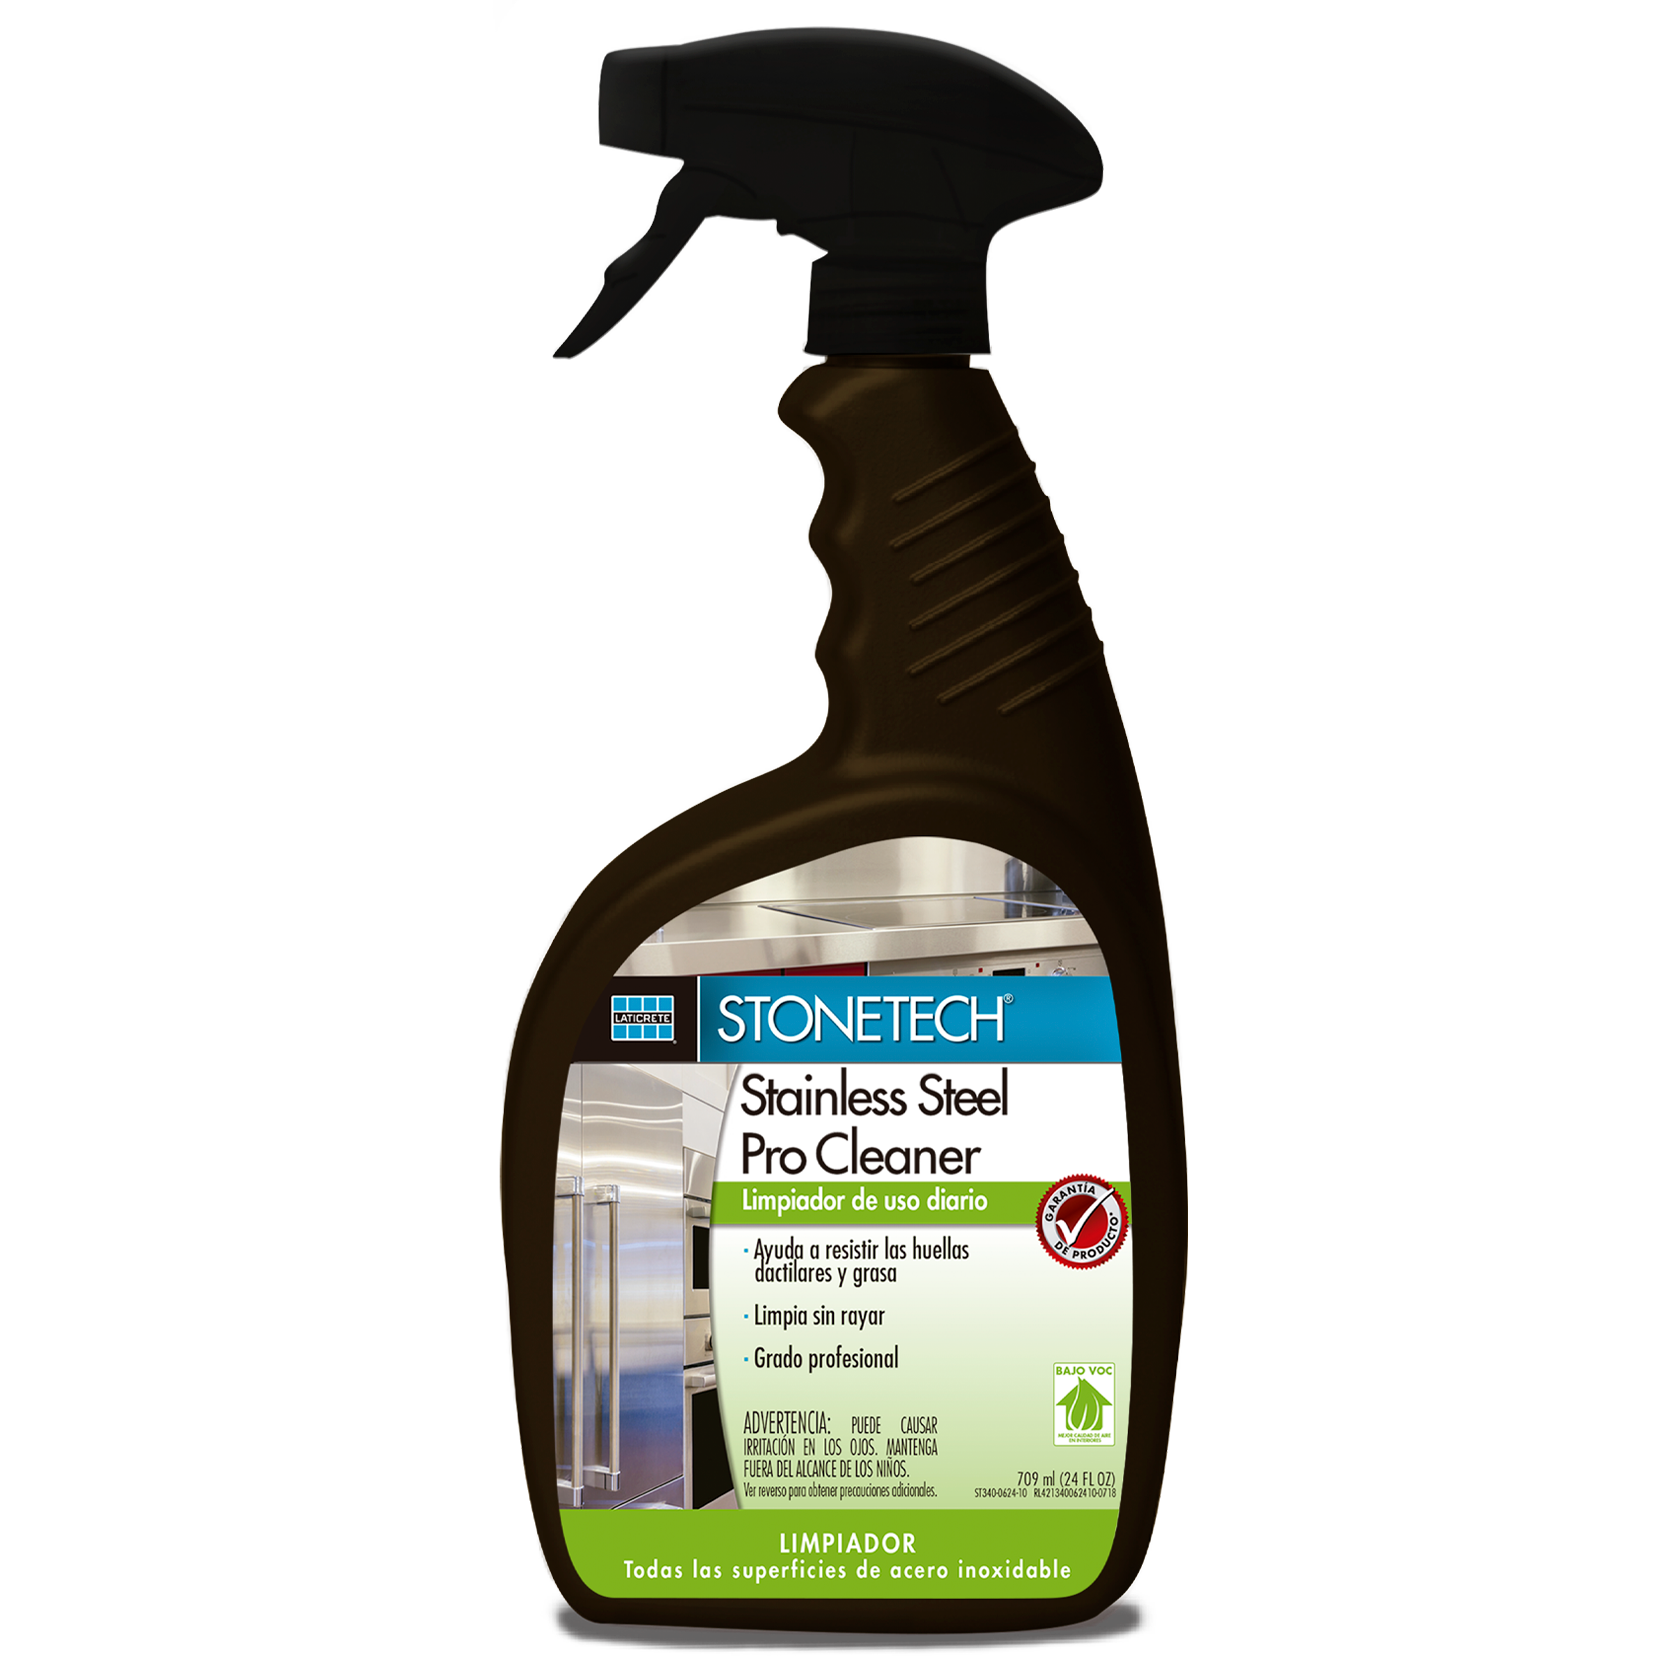 STONETECH® Stainless Steel Pro Cleaner